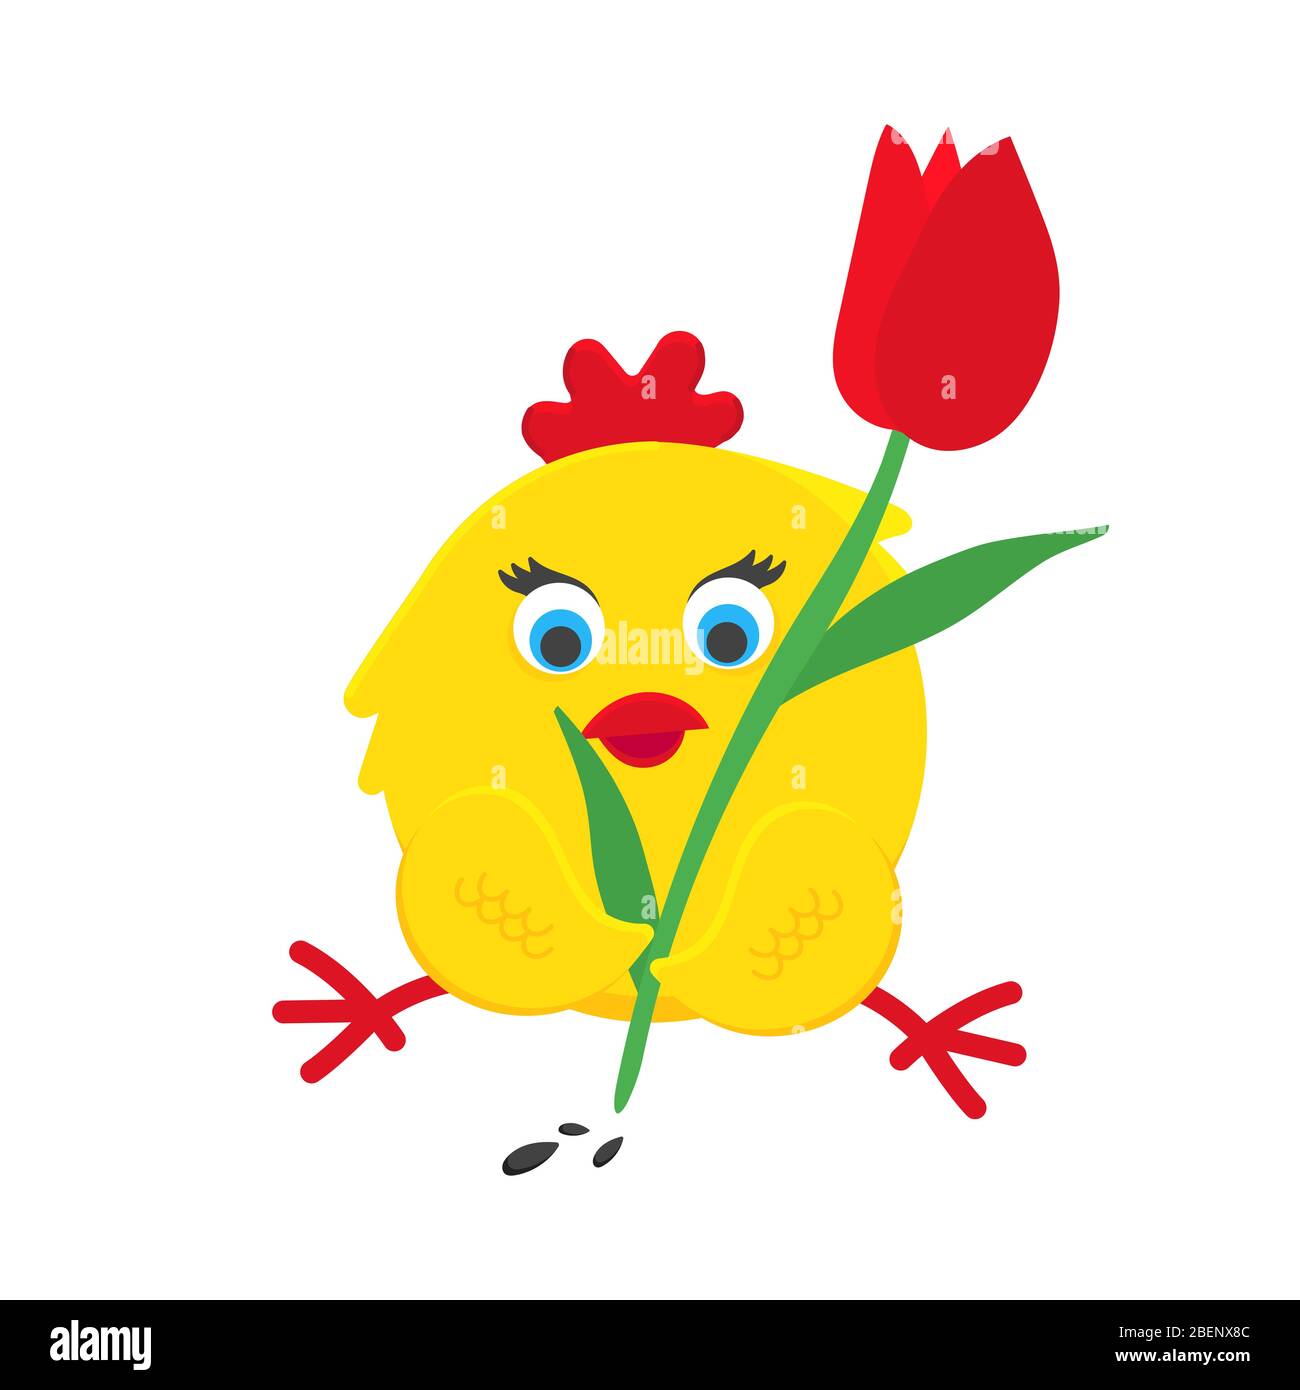 https://c8.alamy.com/comp/2BENX8C/cute-funny-little-chick-chiken-hen-cartoon-flat-style-design-vector-illustration-isolated-on-white-background-funny-yellow-chicken-standing-up-on-the-2BENX8C.jpg